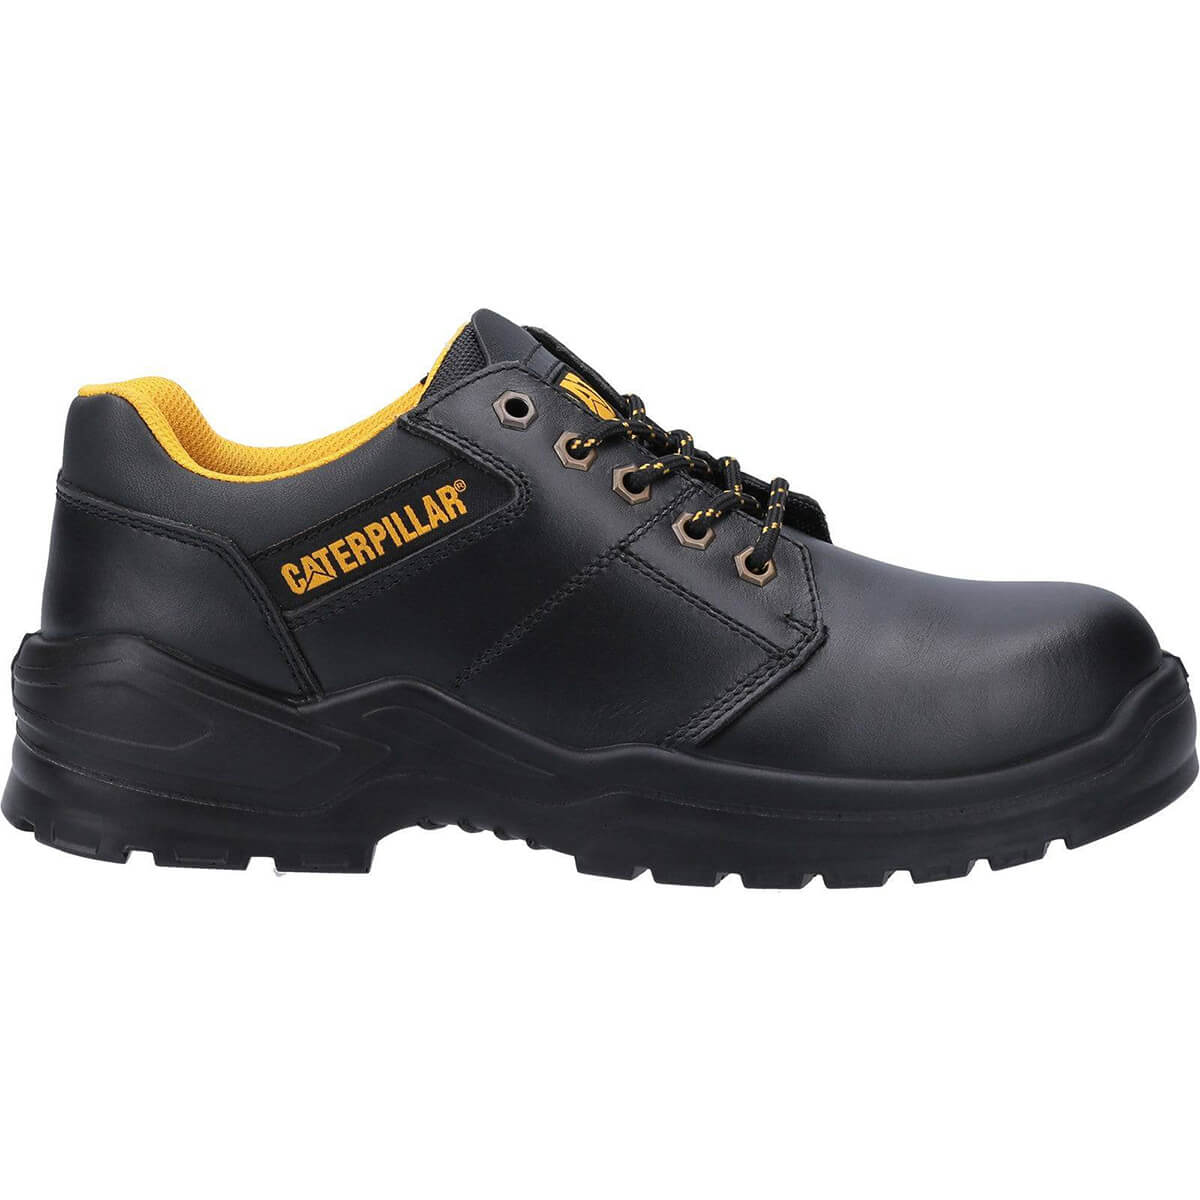 Caterpillar Striver Low S3 Steel Toe Cap Safety Shoes - Shoe Store Direct